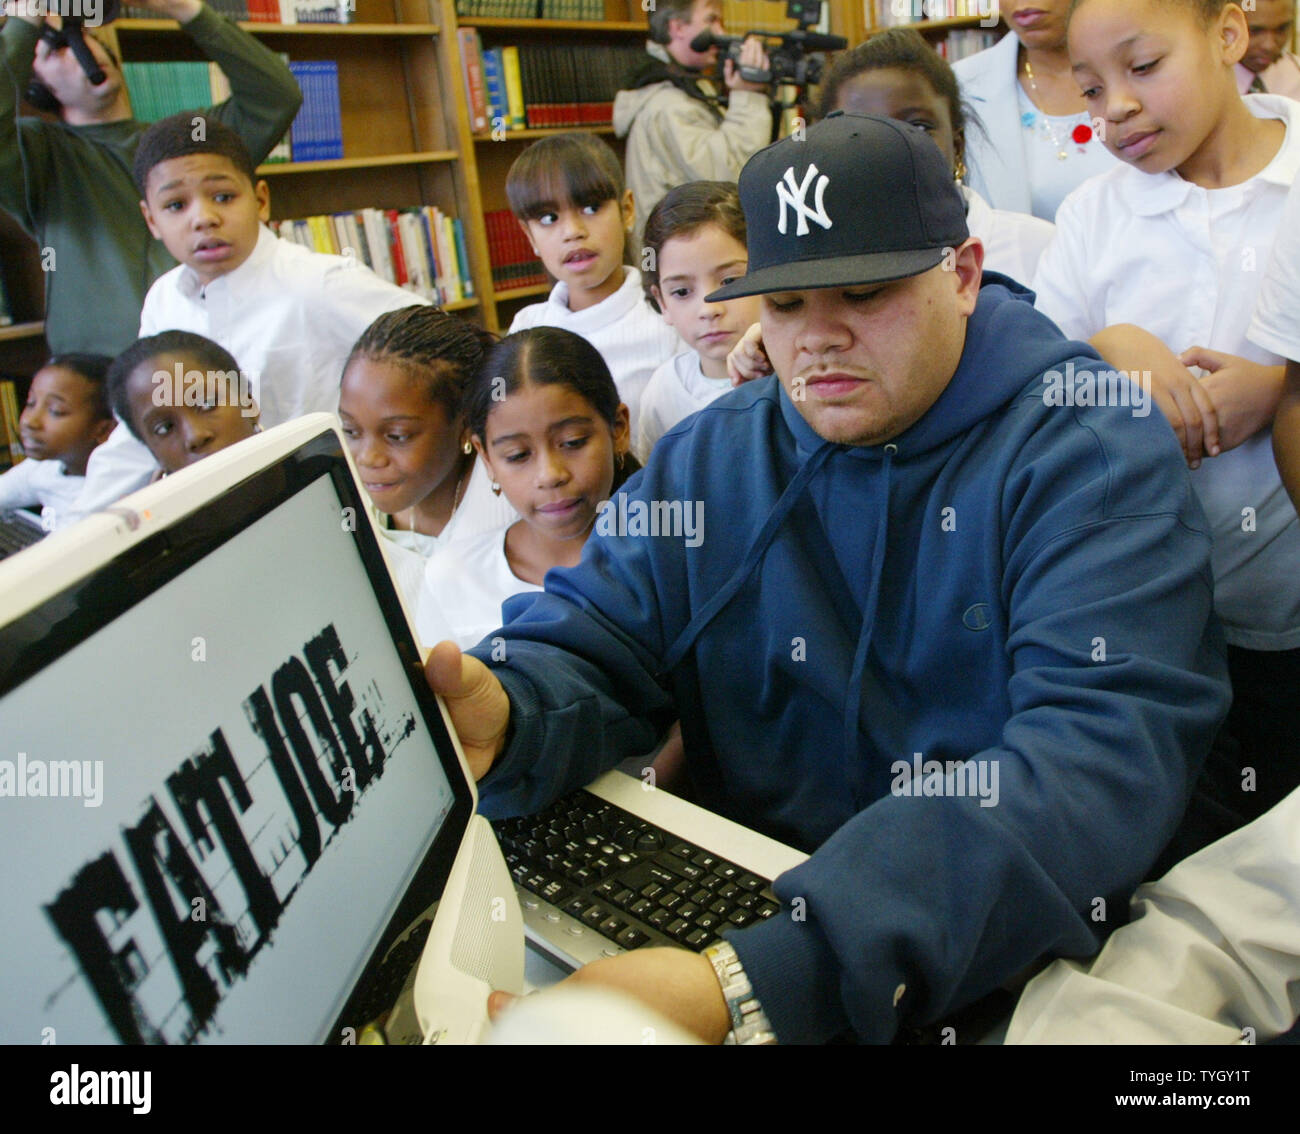 Joseph Cartegena, known as hip-hop artist Fat Joe, is joined by students at PS 146 as he checks out one of the 20 new computers that he donated to the Bronx school, which he attended as a child, on December 21, 2004 in New York City.  (UPI Photo/Monika Graff) Stock Photo